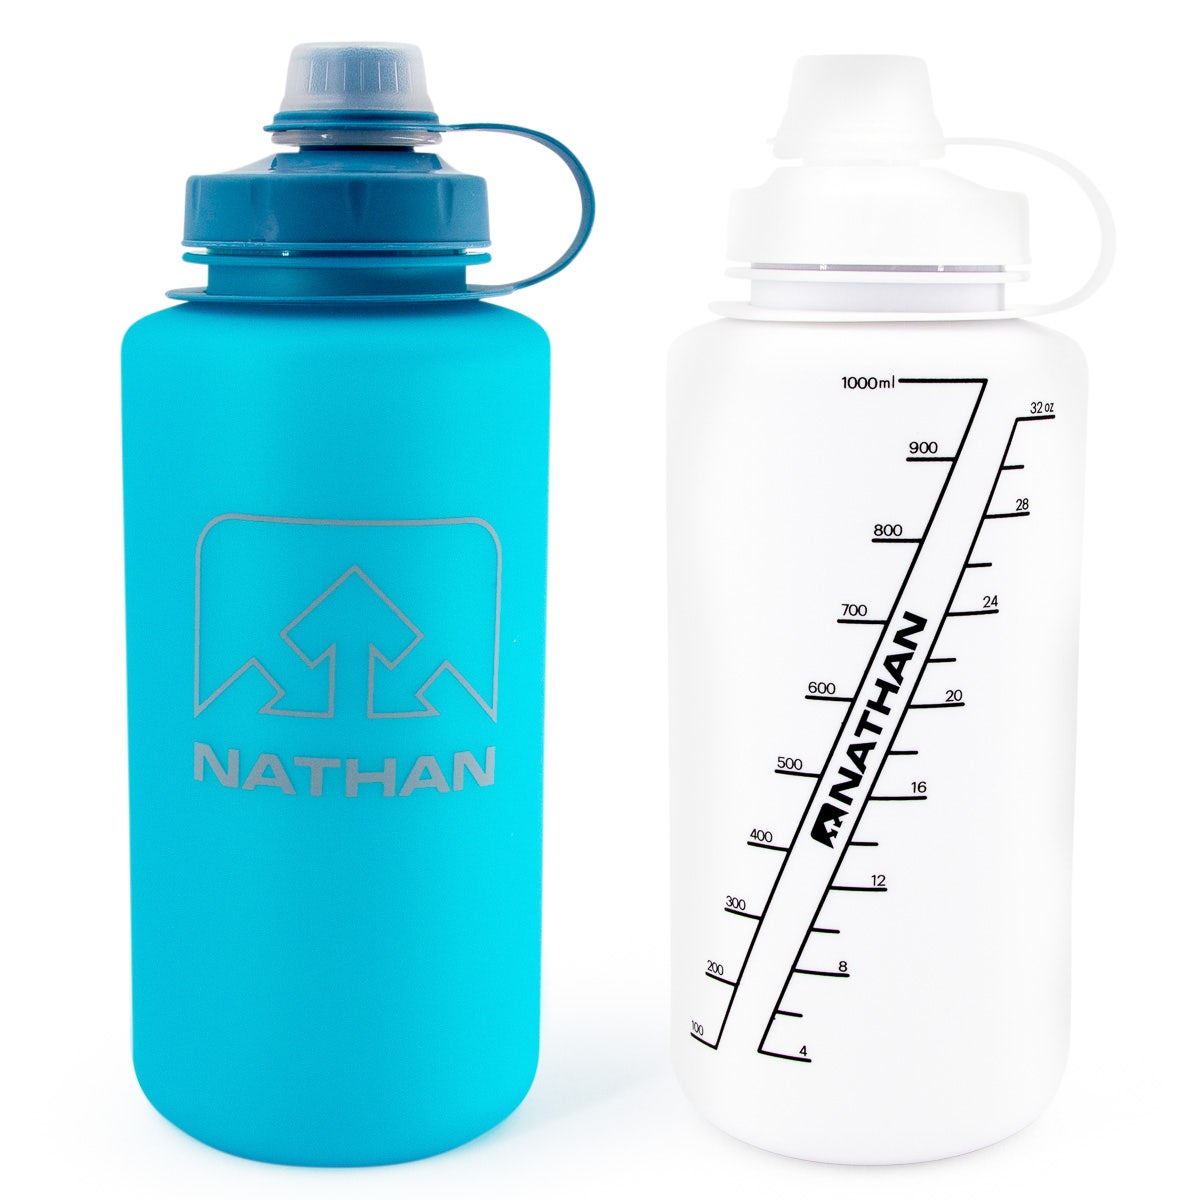 HYDRATE Bottles - Spill-Proof Stainless Steel Travel Coffee